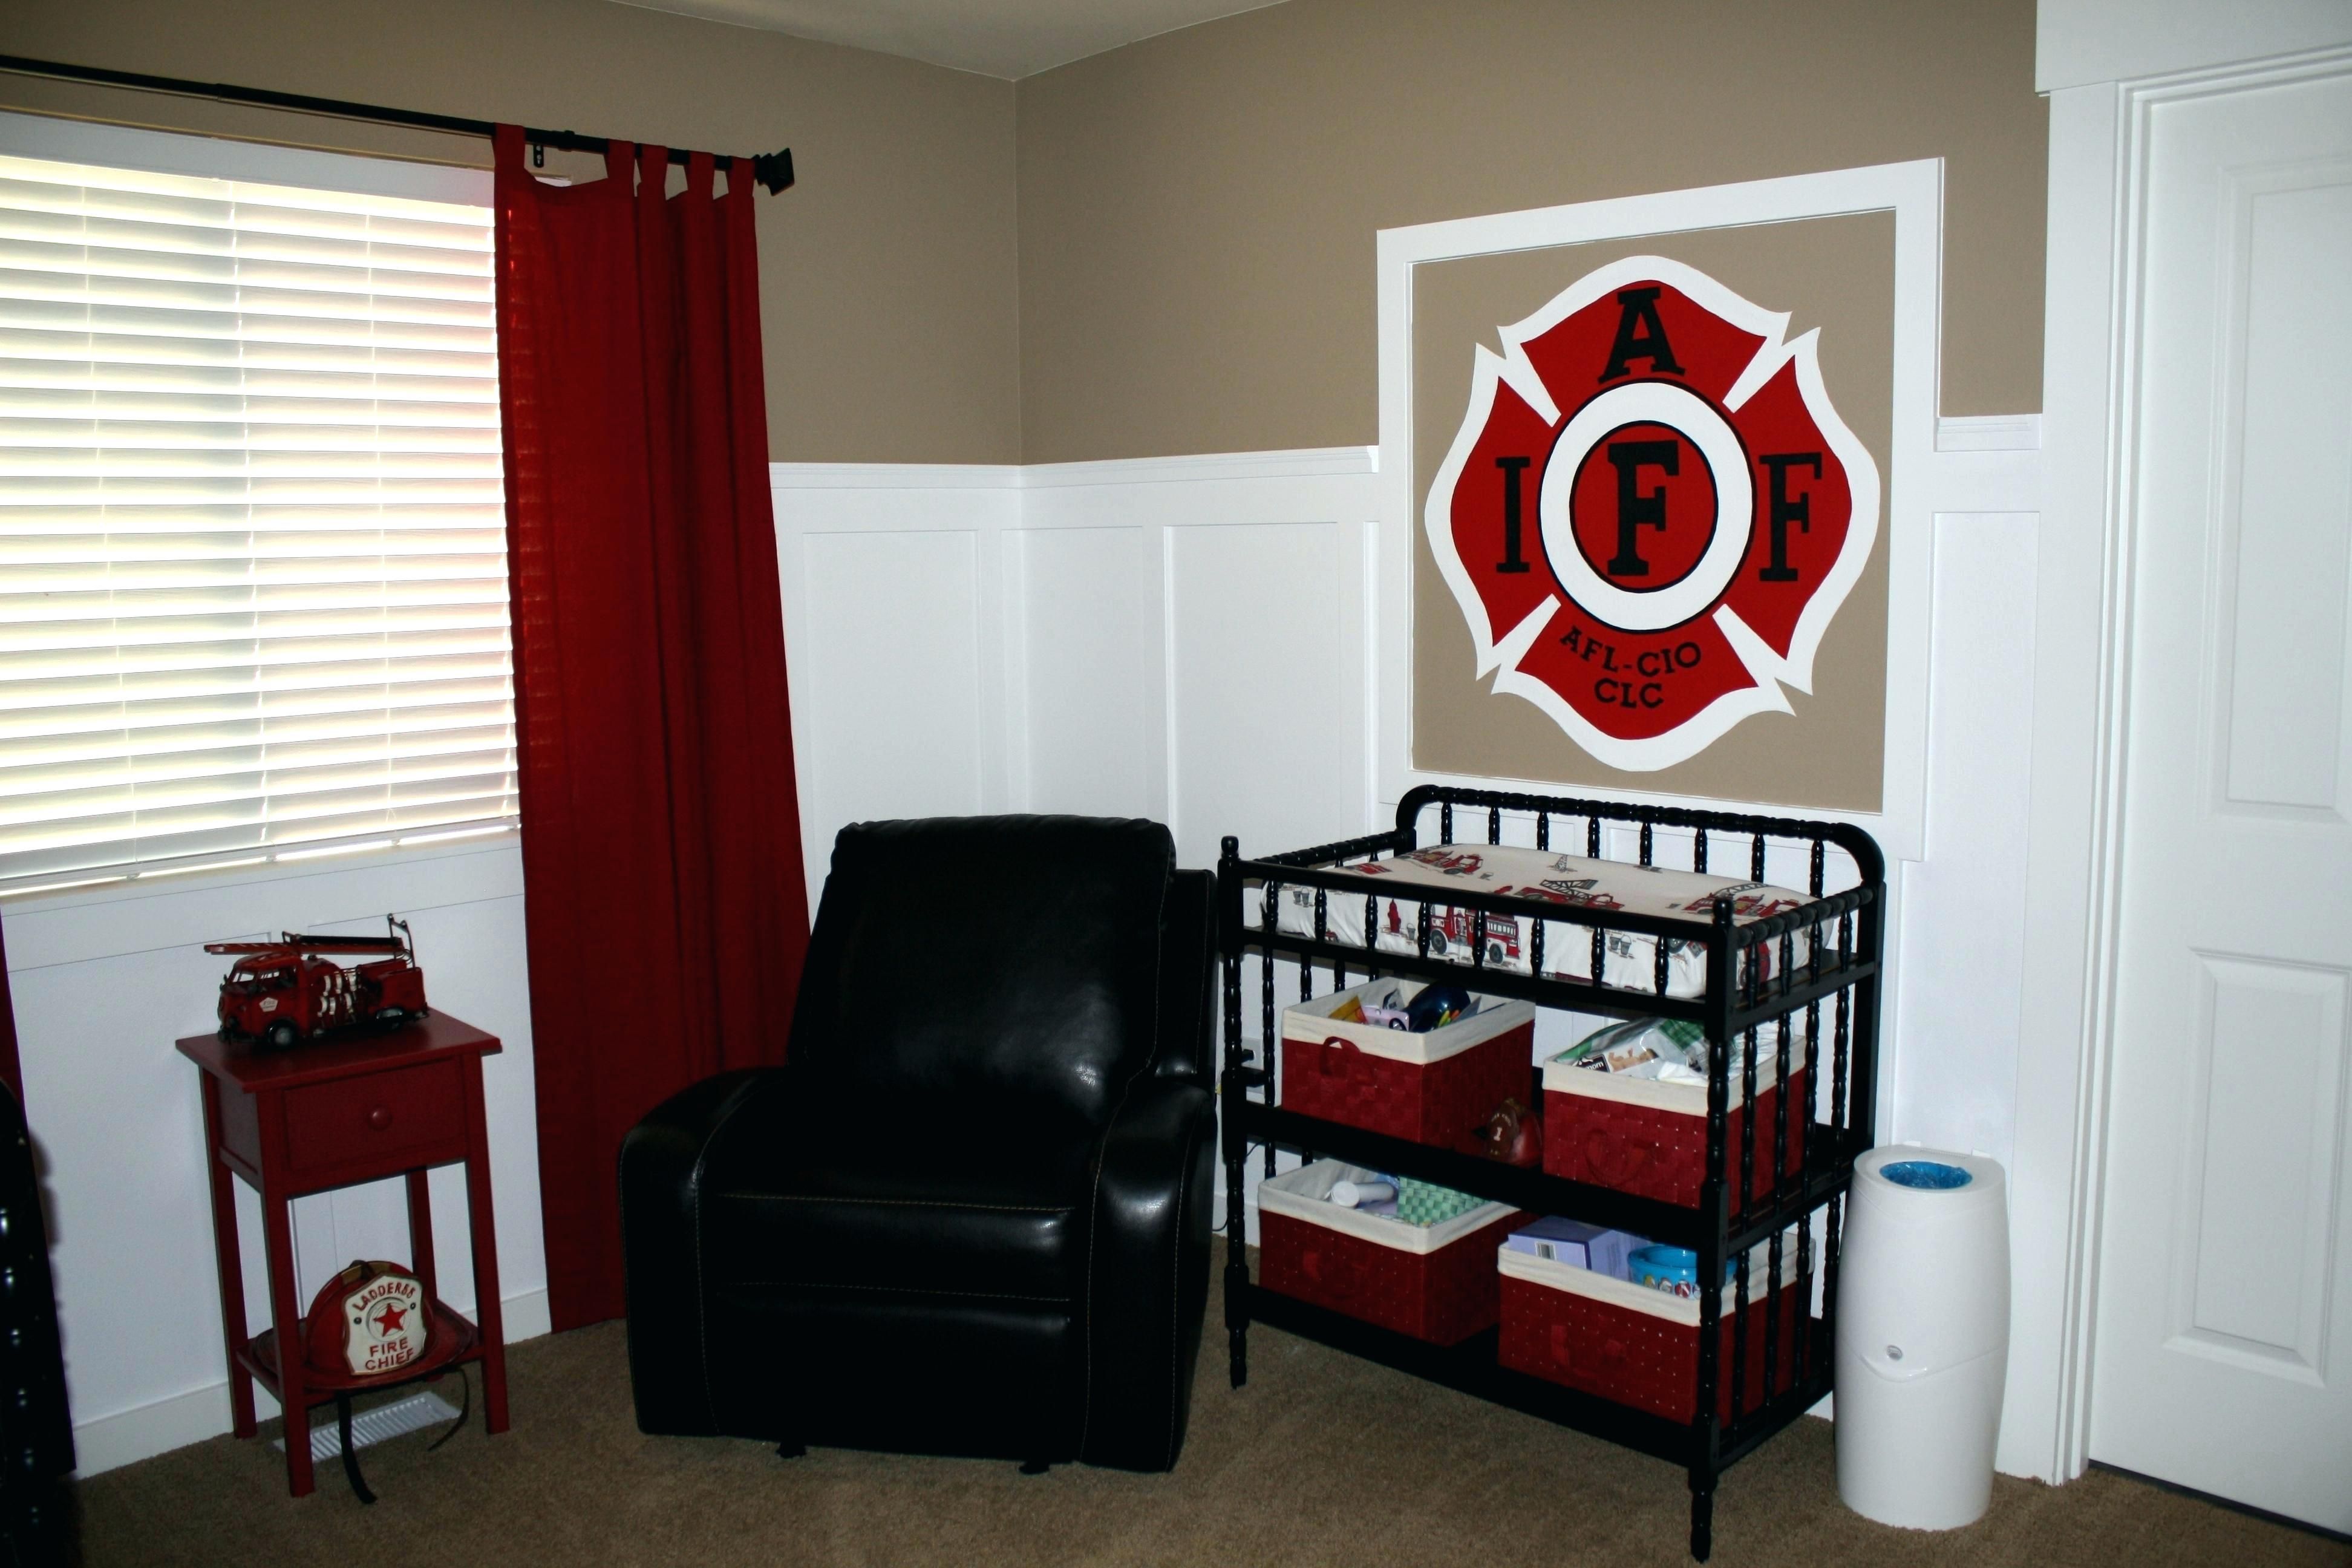 Fireman Wall Decals Articles With Fire Station Wall Decor Tag Within Firefighter Wall Art (View 14 of 20)